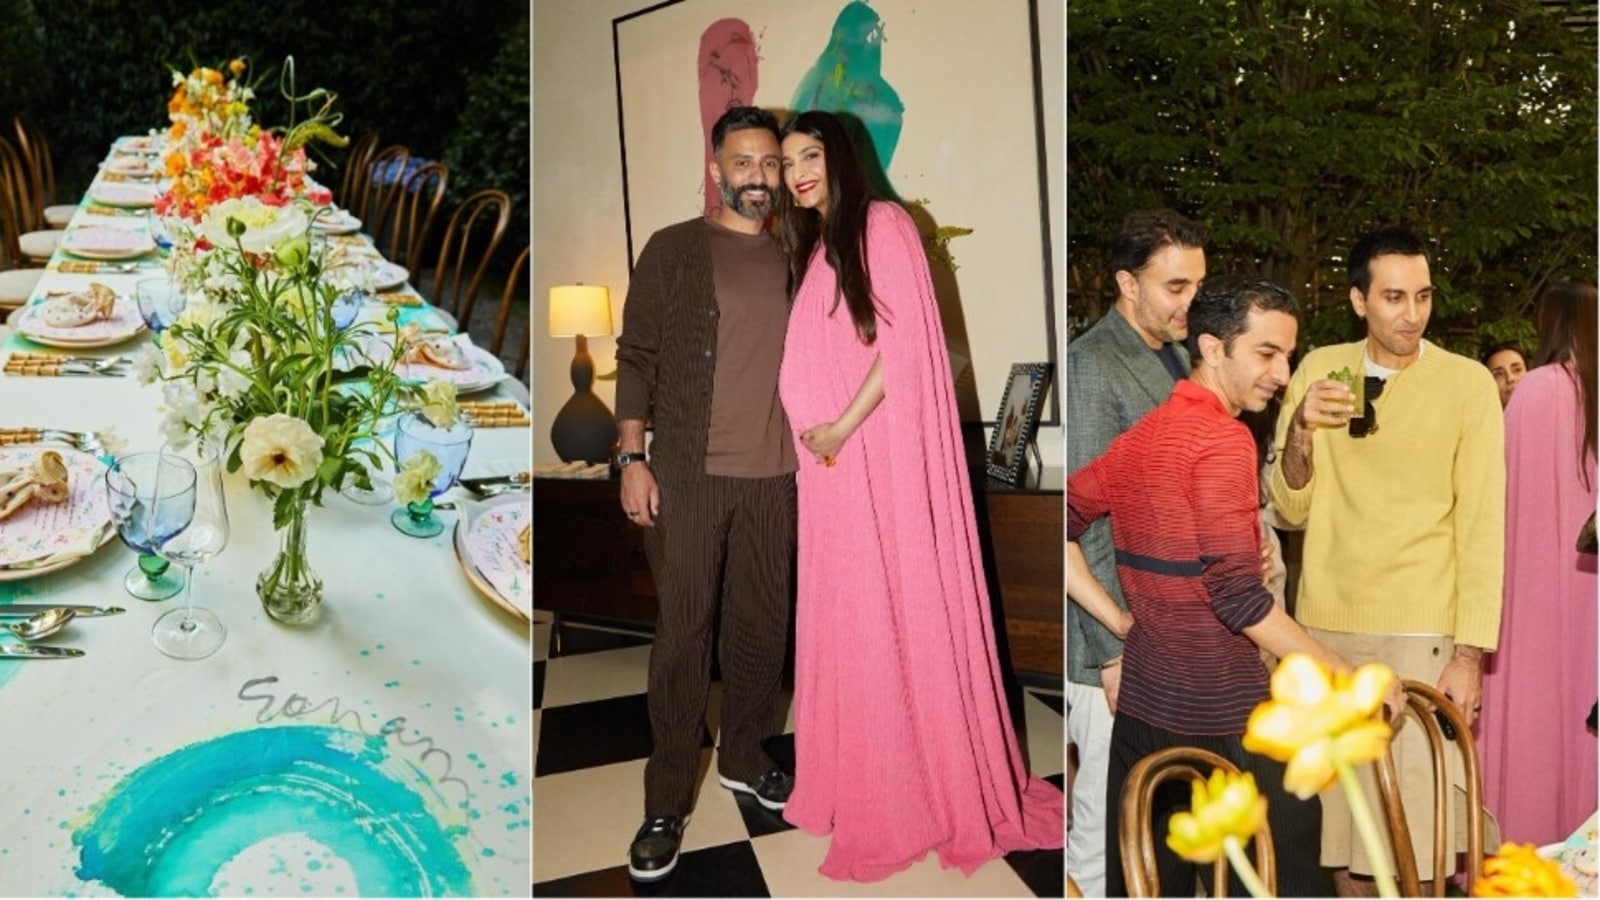 Sonam Kapoor shares unseen pics from her baby shower in London, says 'it’s all starting to feel real'